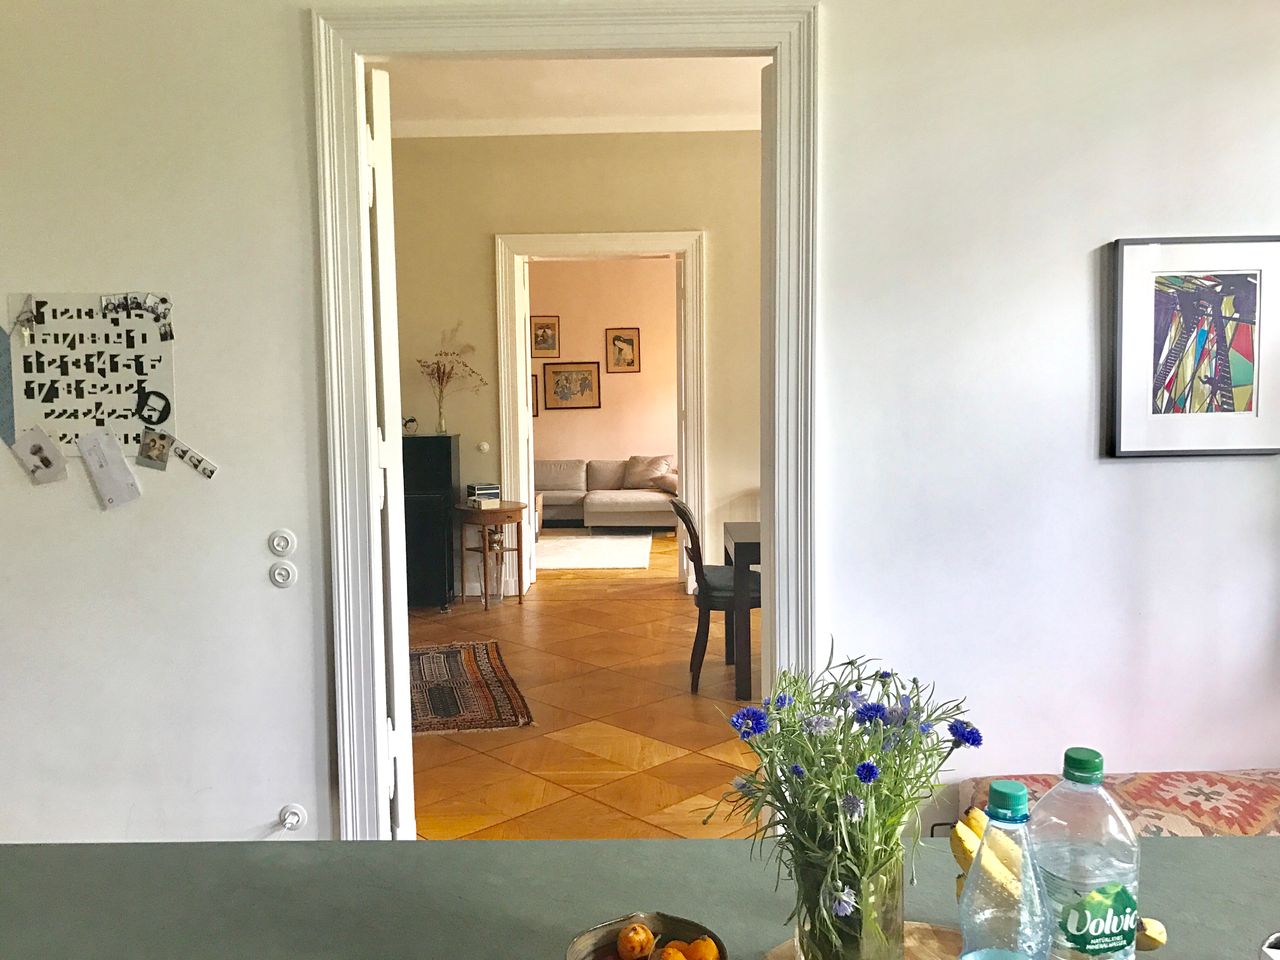 Experience the unique charm of an high-end equipped old building apartment in the heart of Kreuzberg!